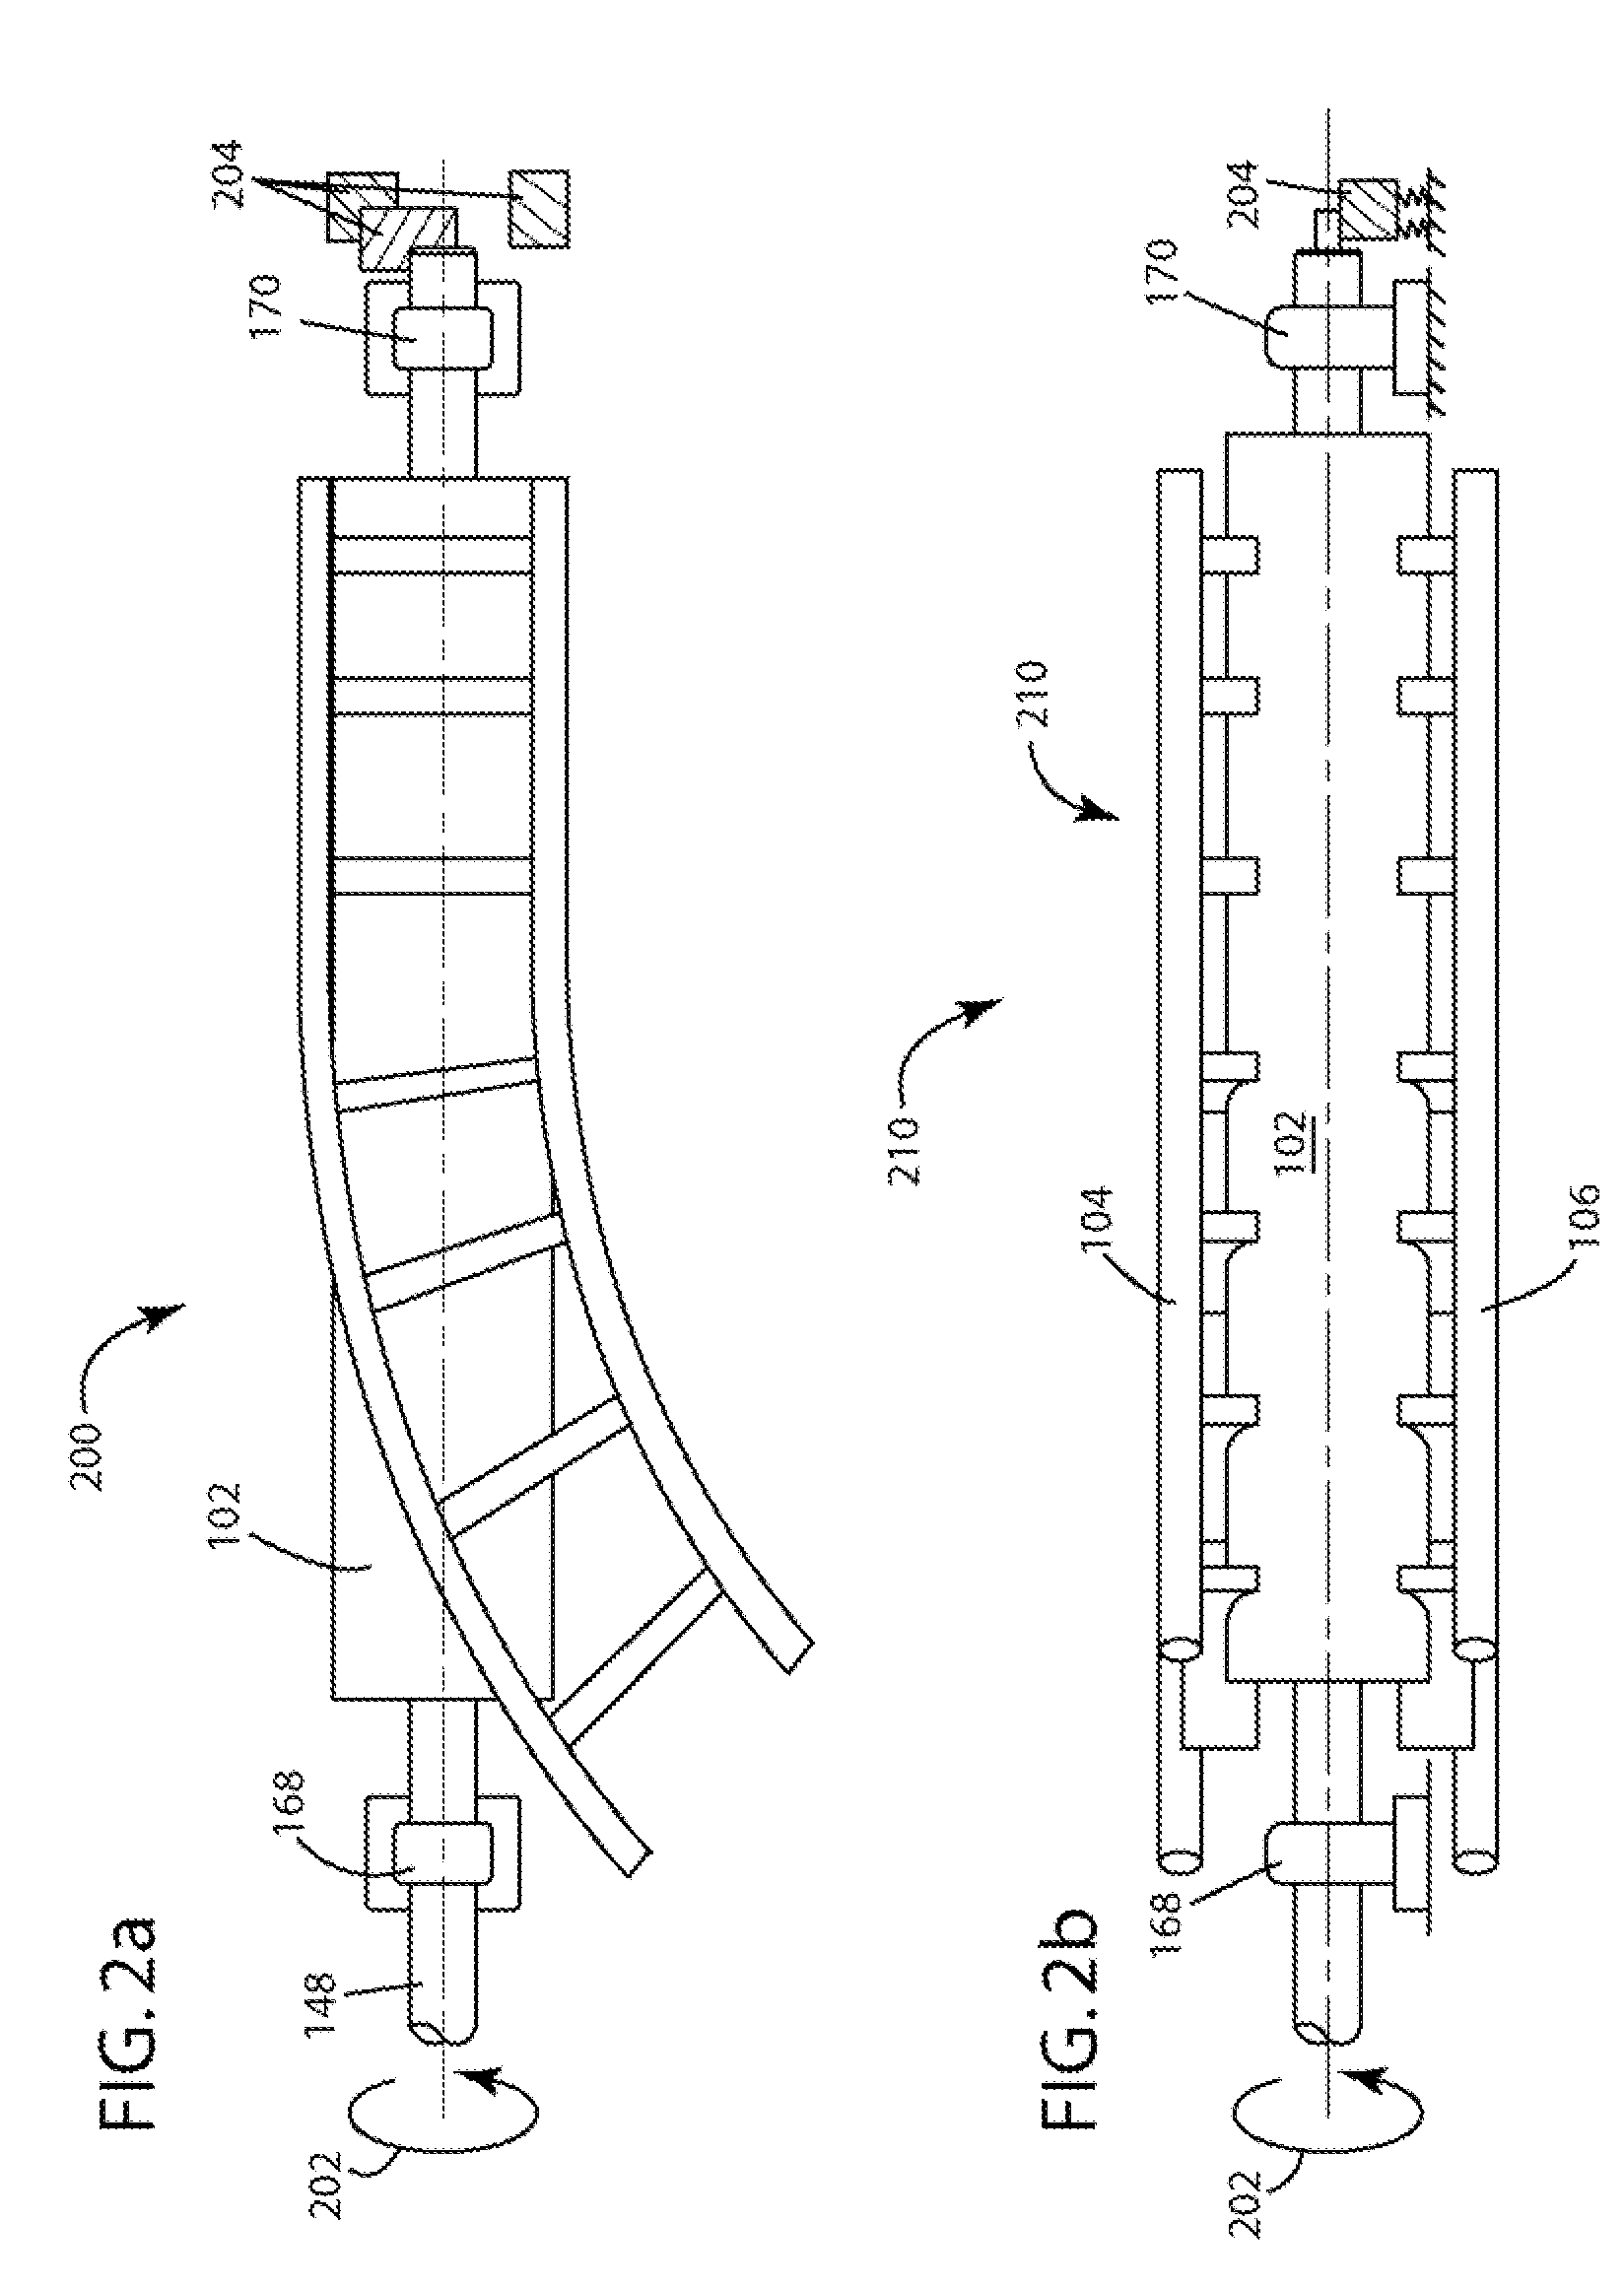 Track-switching device and method